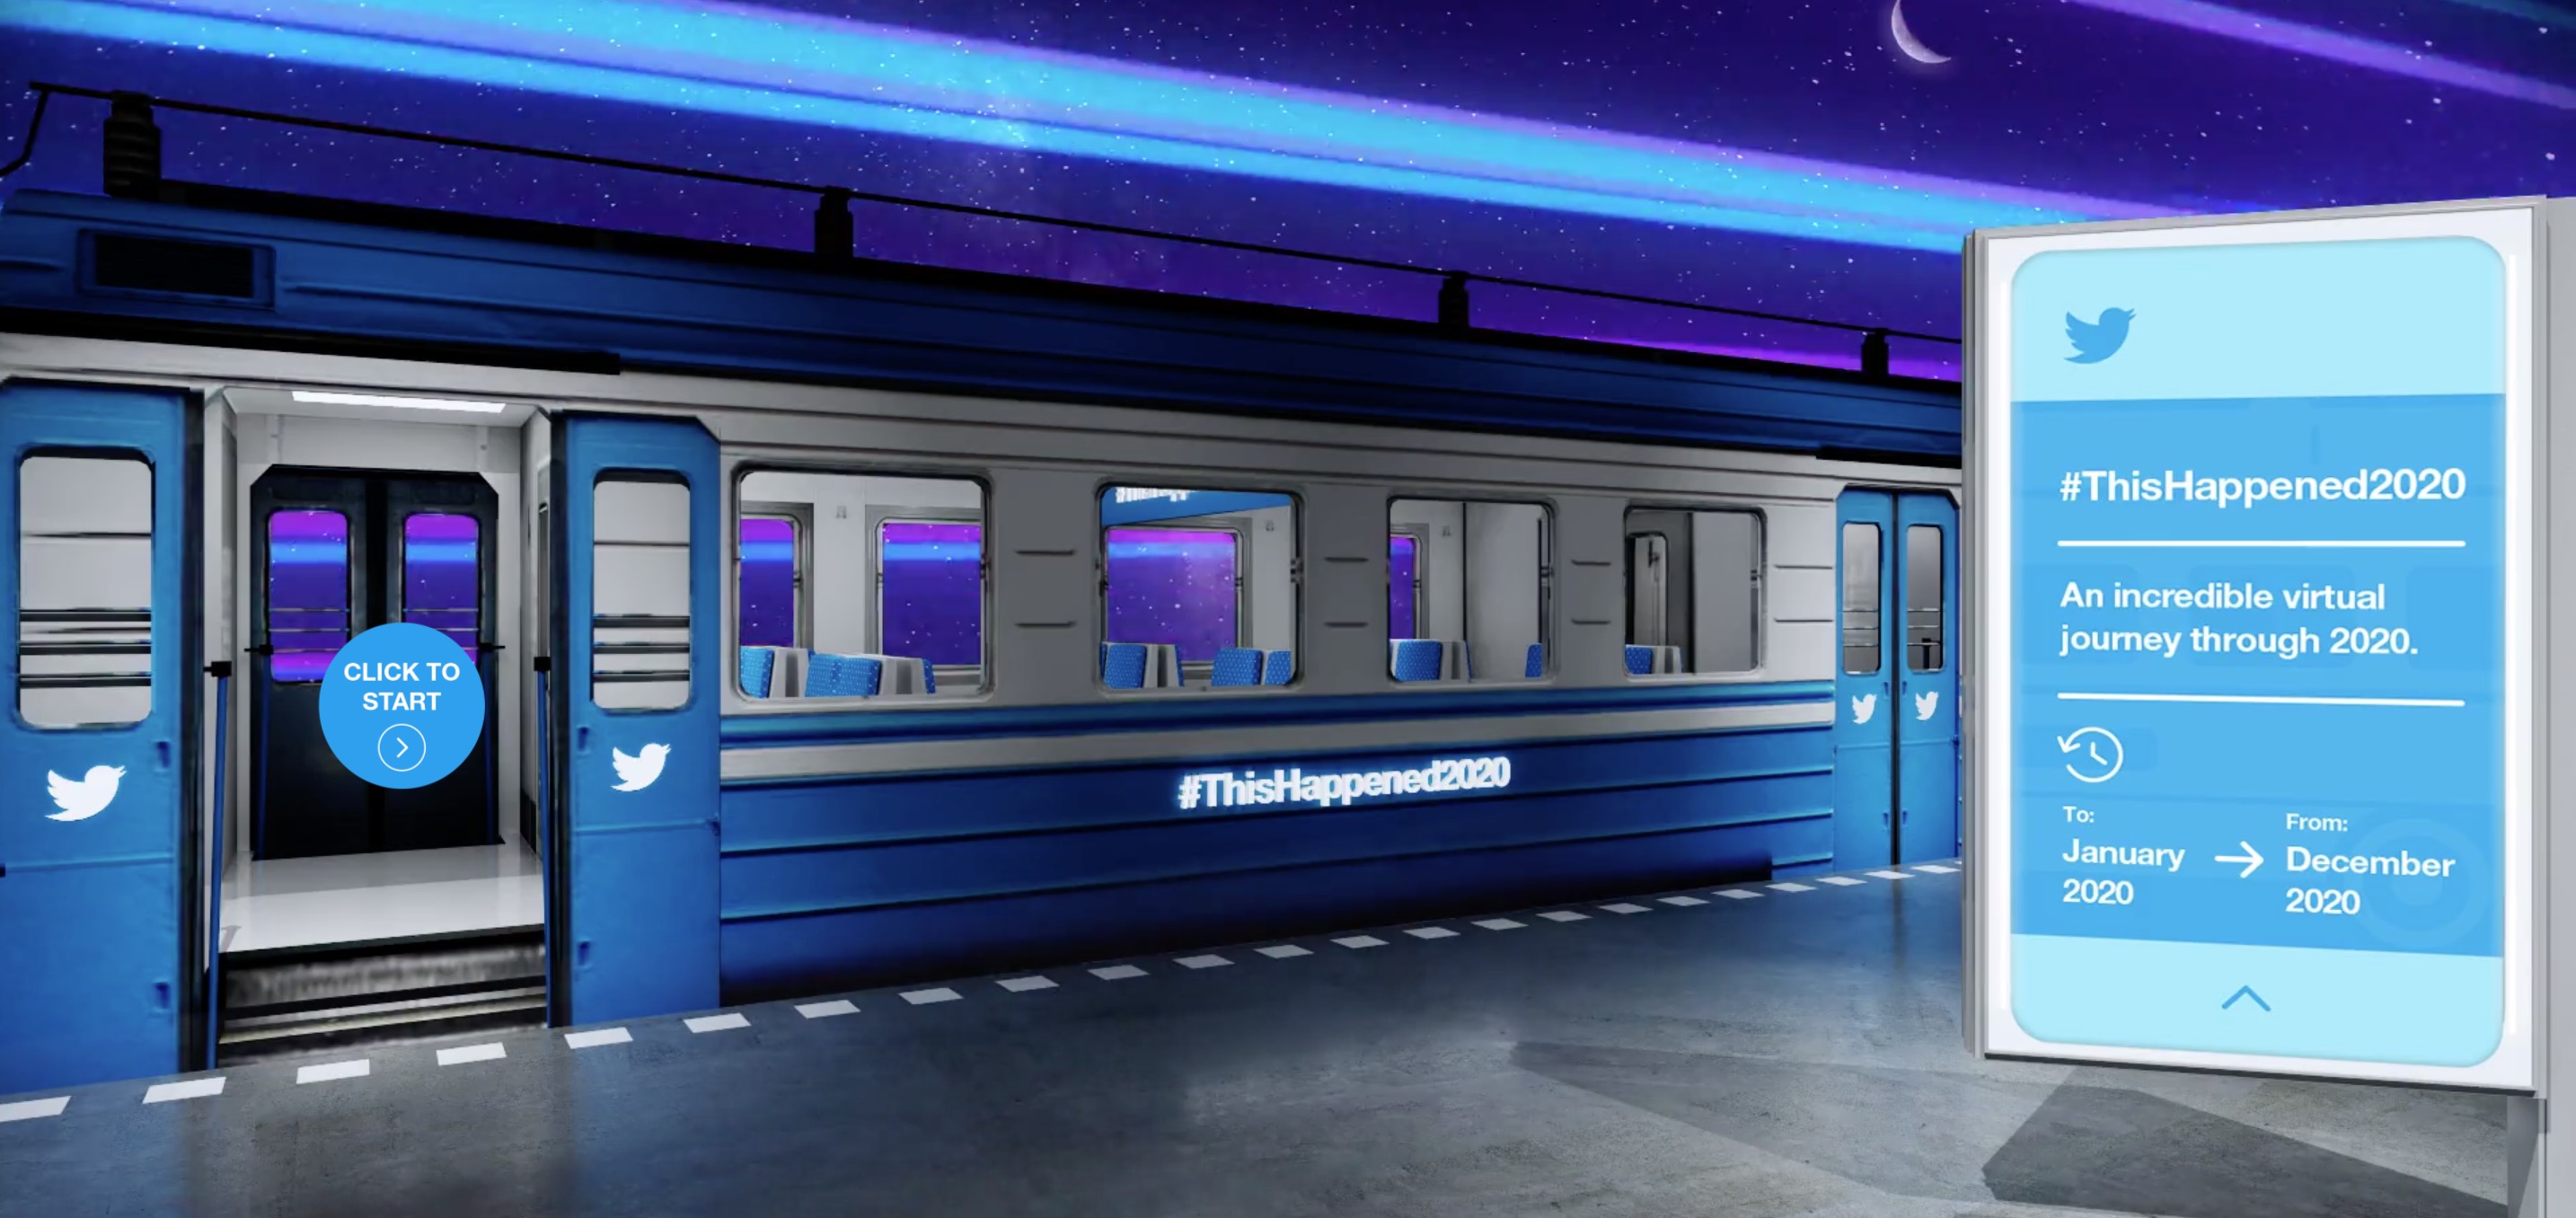 Highlights from Twitter's #ThisHappened2020 Event